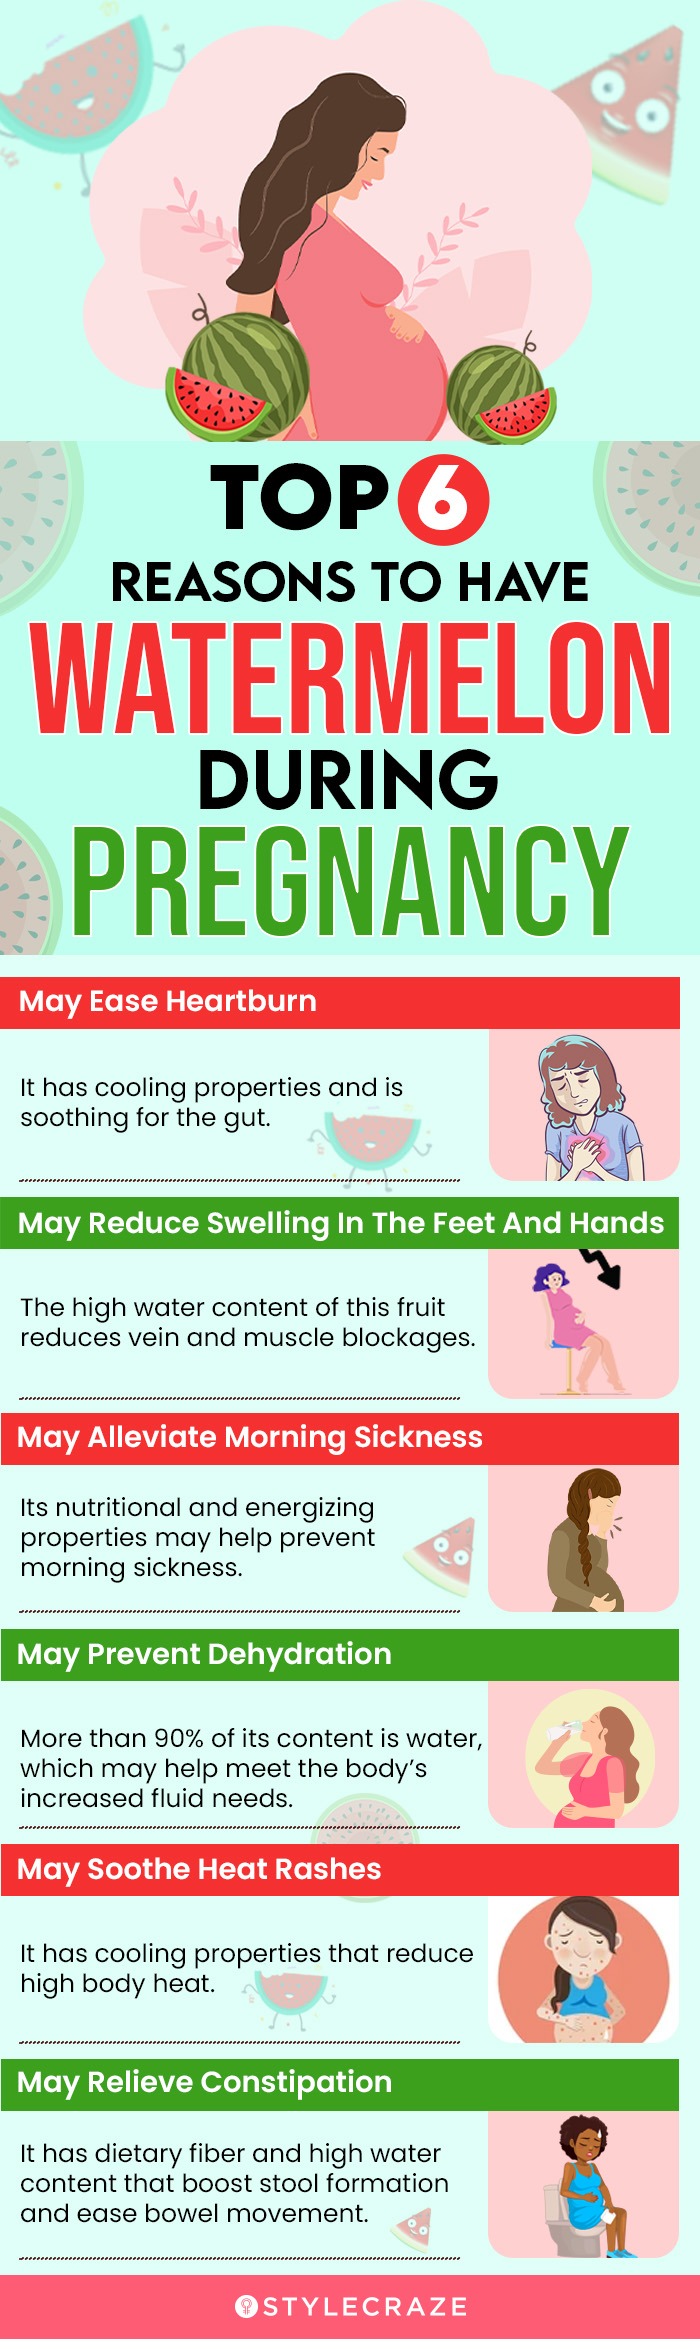 top 6 reasons to have watermelon during pregnancy (infographic)